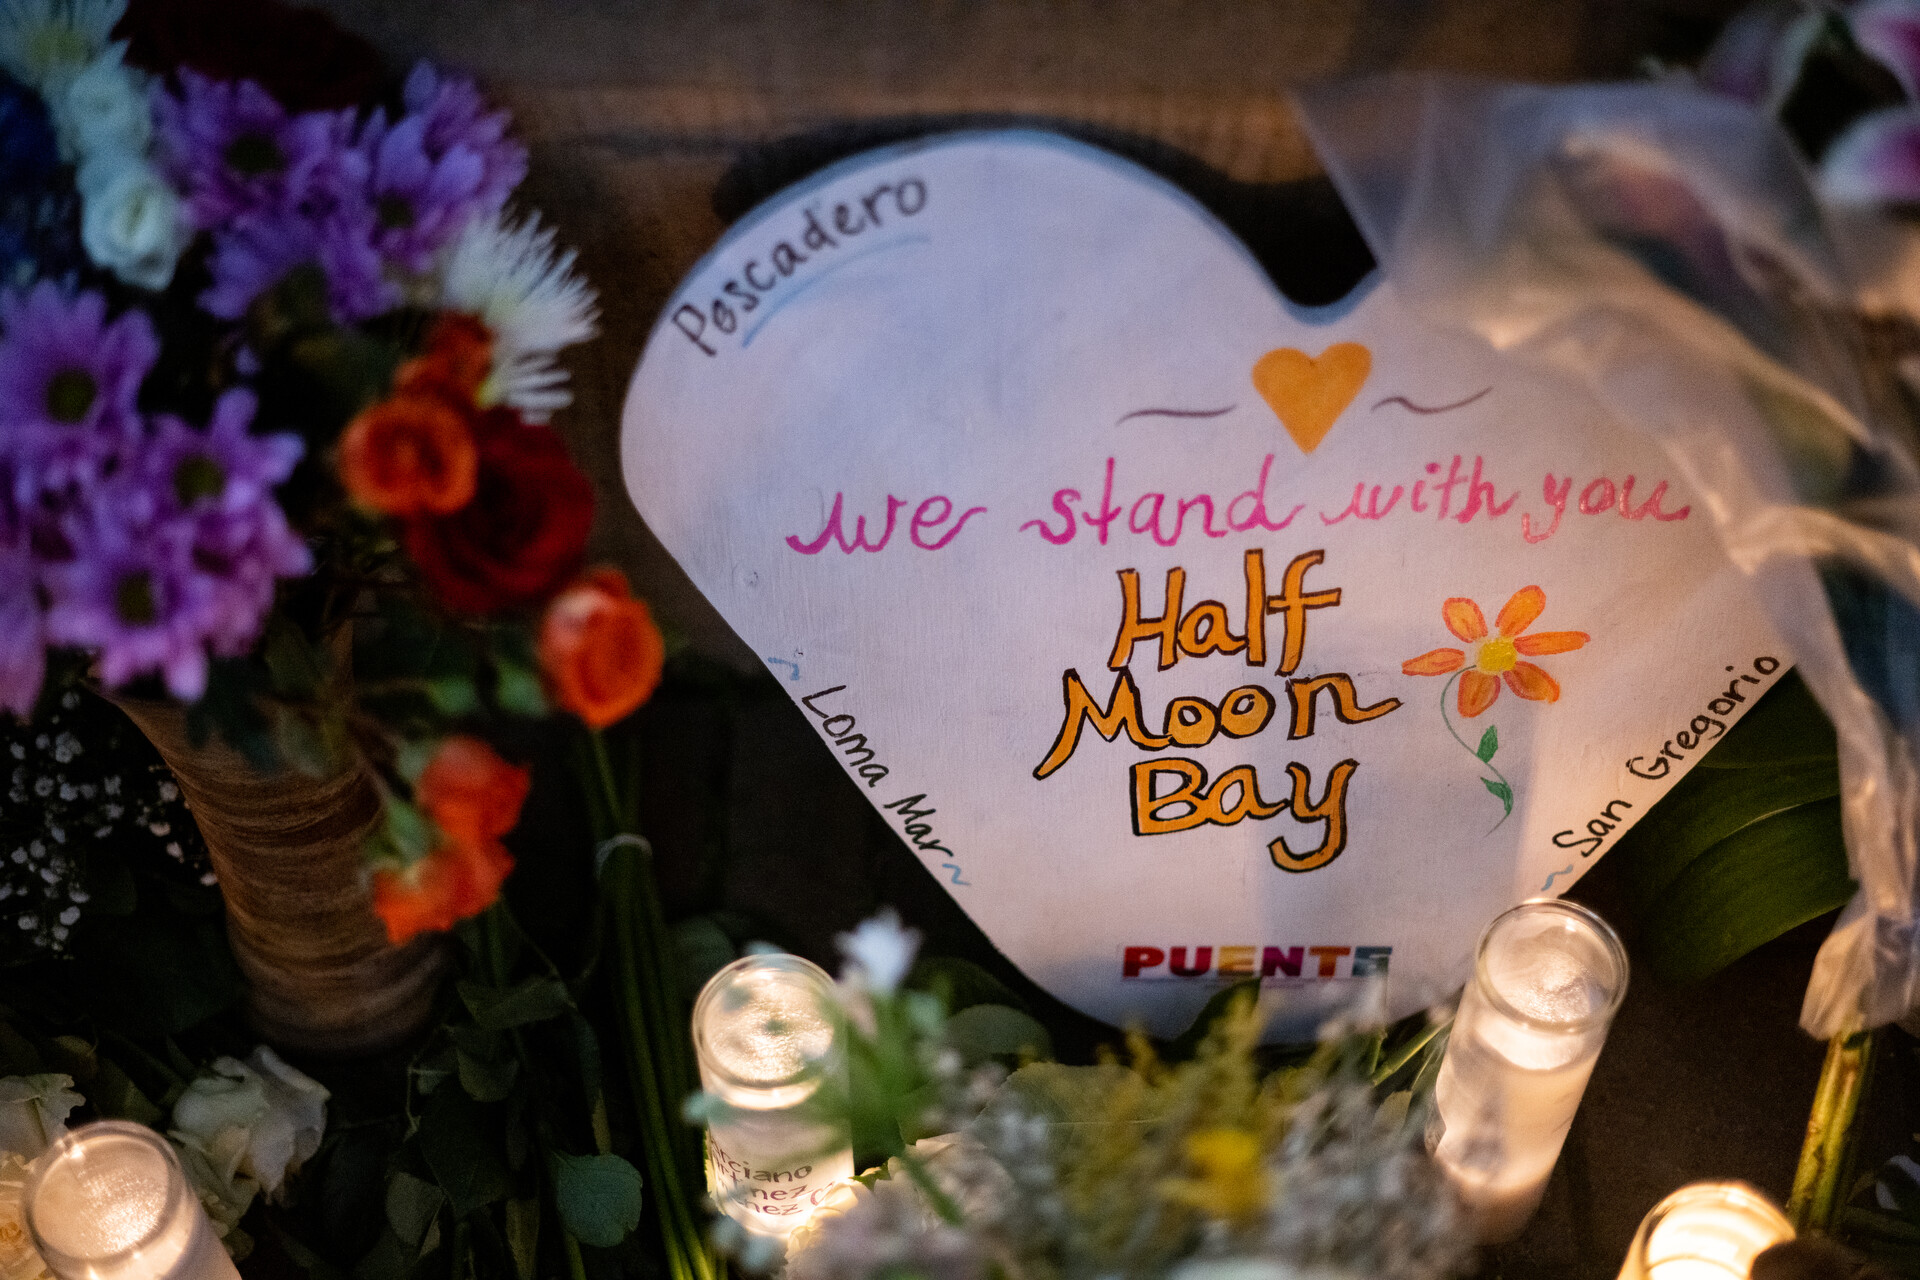 A candlelit vigil for the victims of the Half Moon Bay mass shooting.